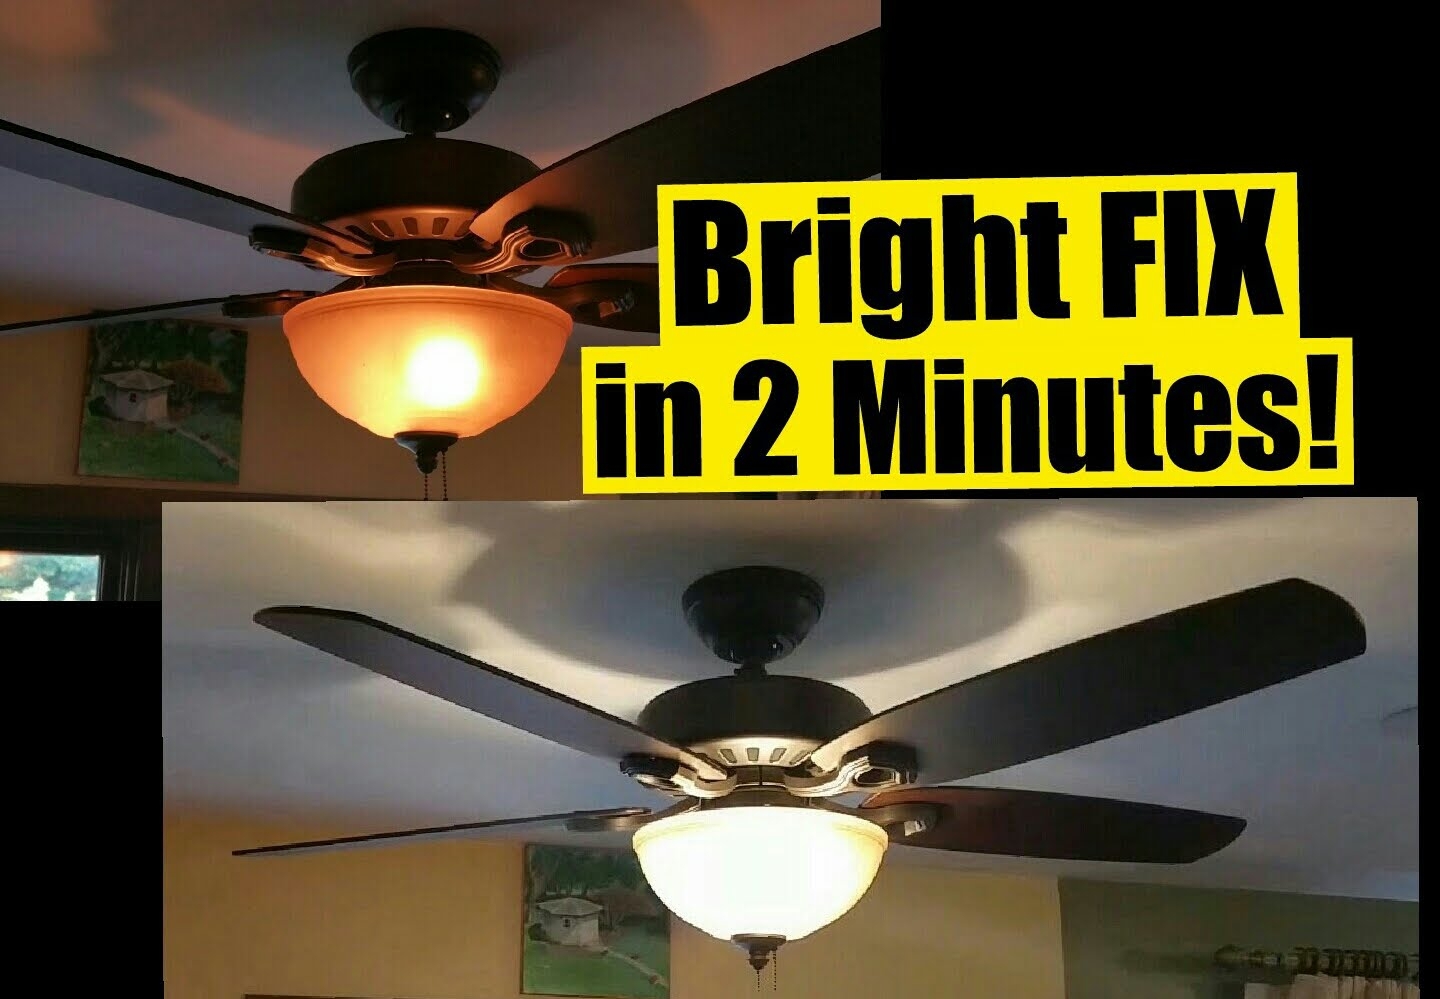 Ceiling Fan With Bright Led Light